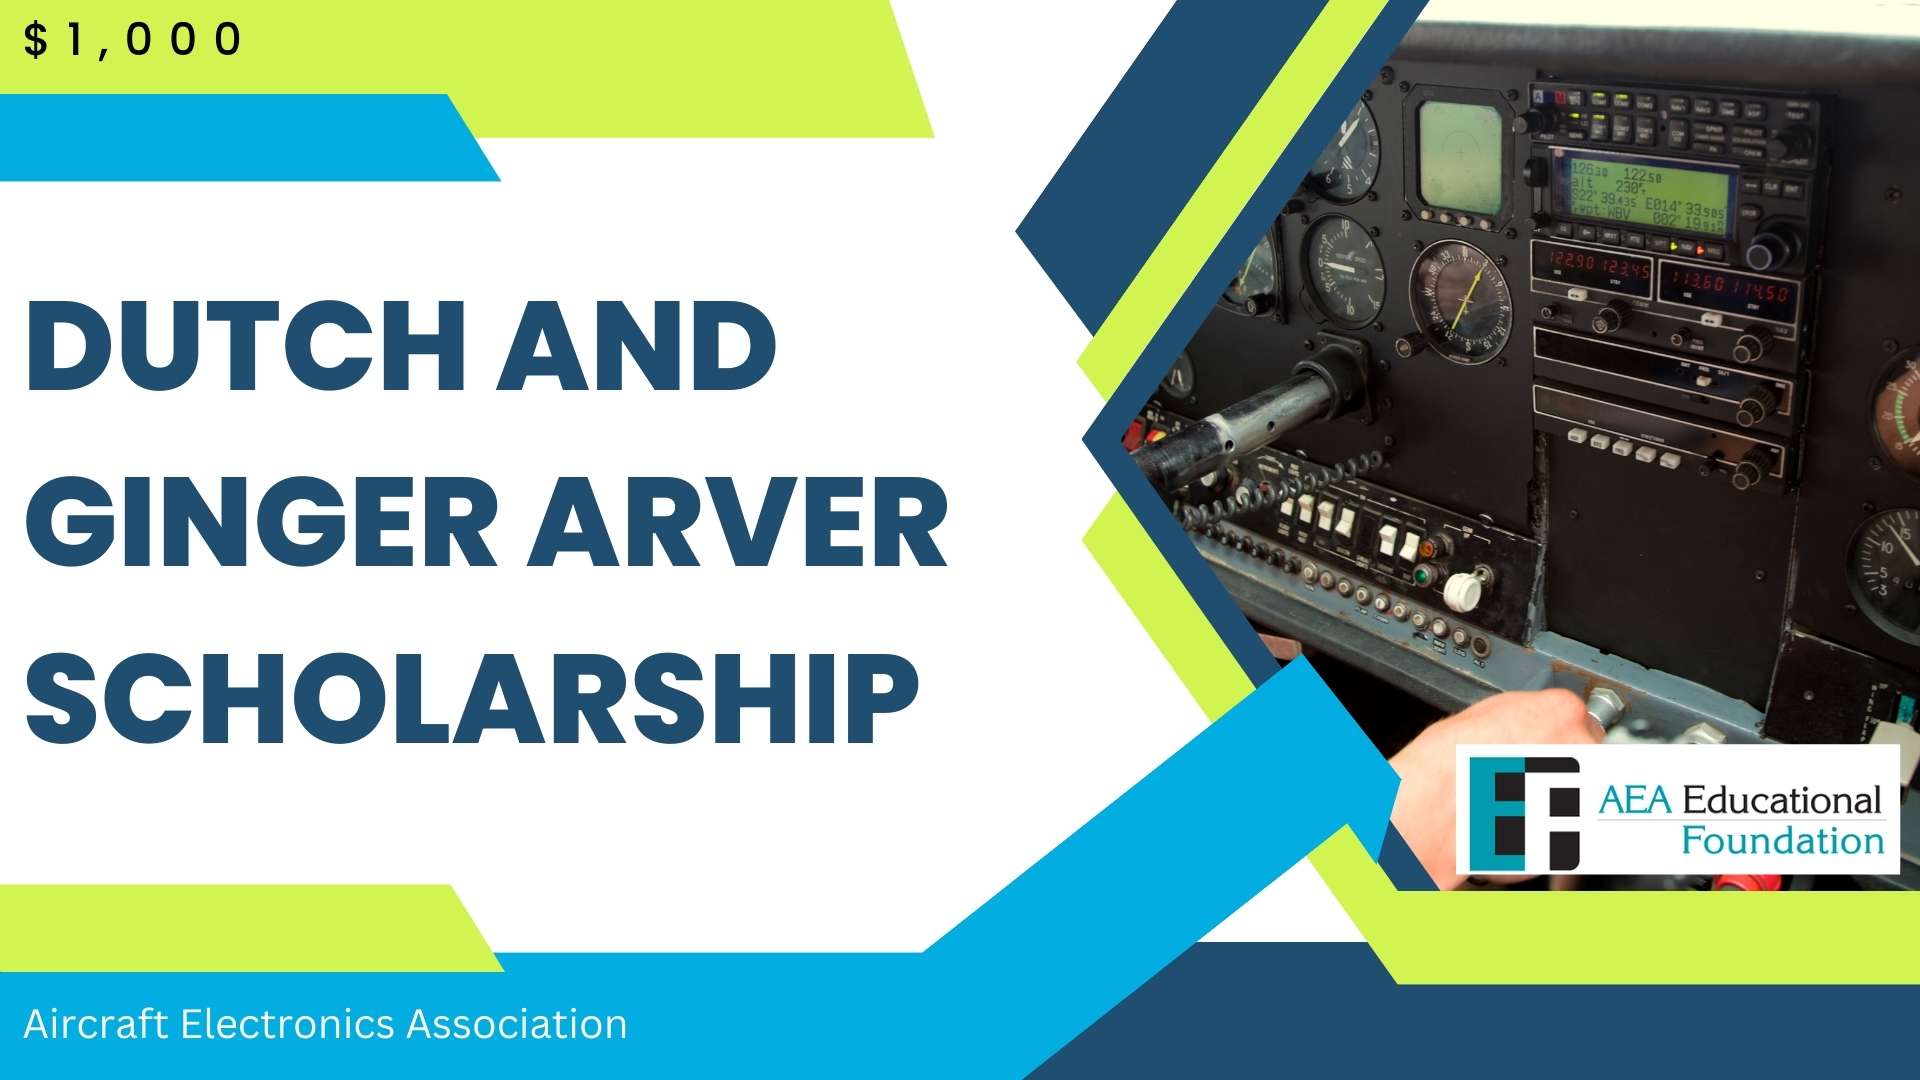 Dutch and Ginger Arver Scholarship